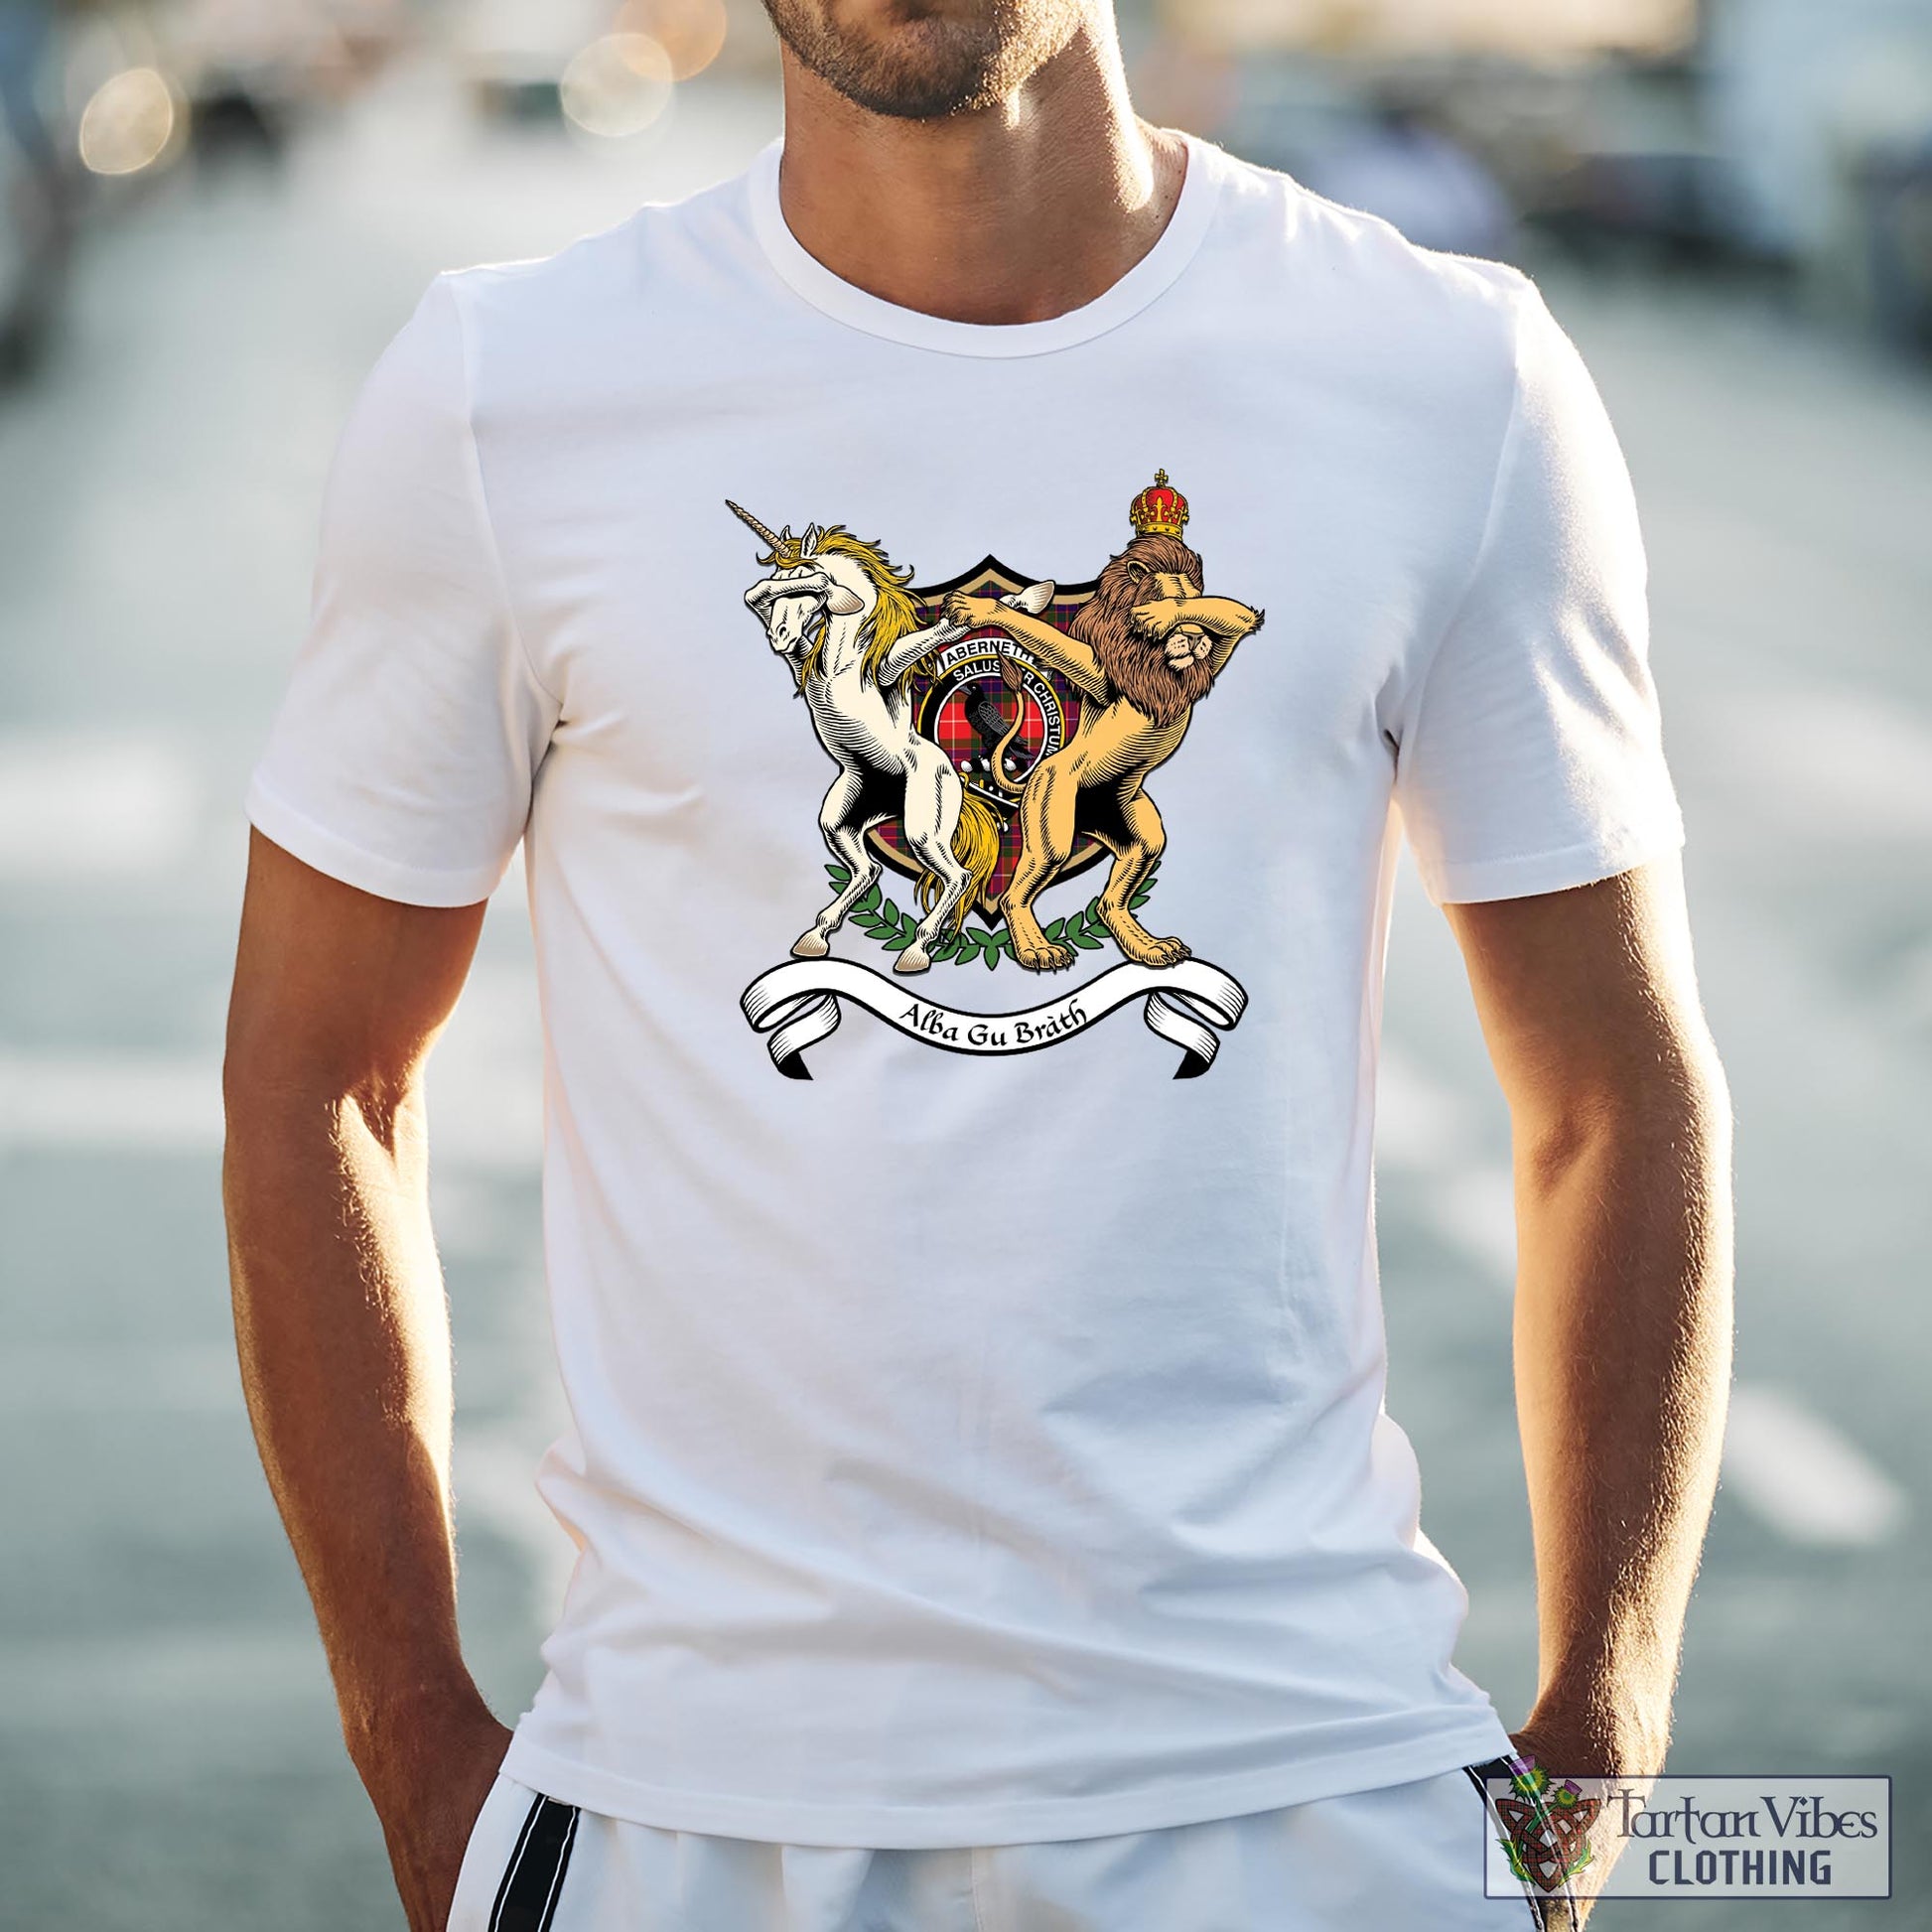 Tartan Vibes Clothing Abernethy Family Crest Cotton Men's T-Shirt with Scotland Royal Coat Of Arm Funny Style